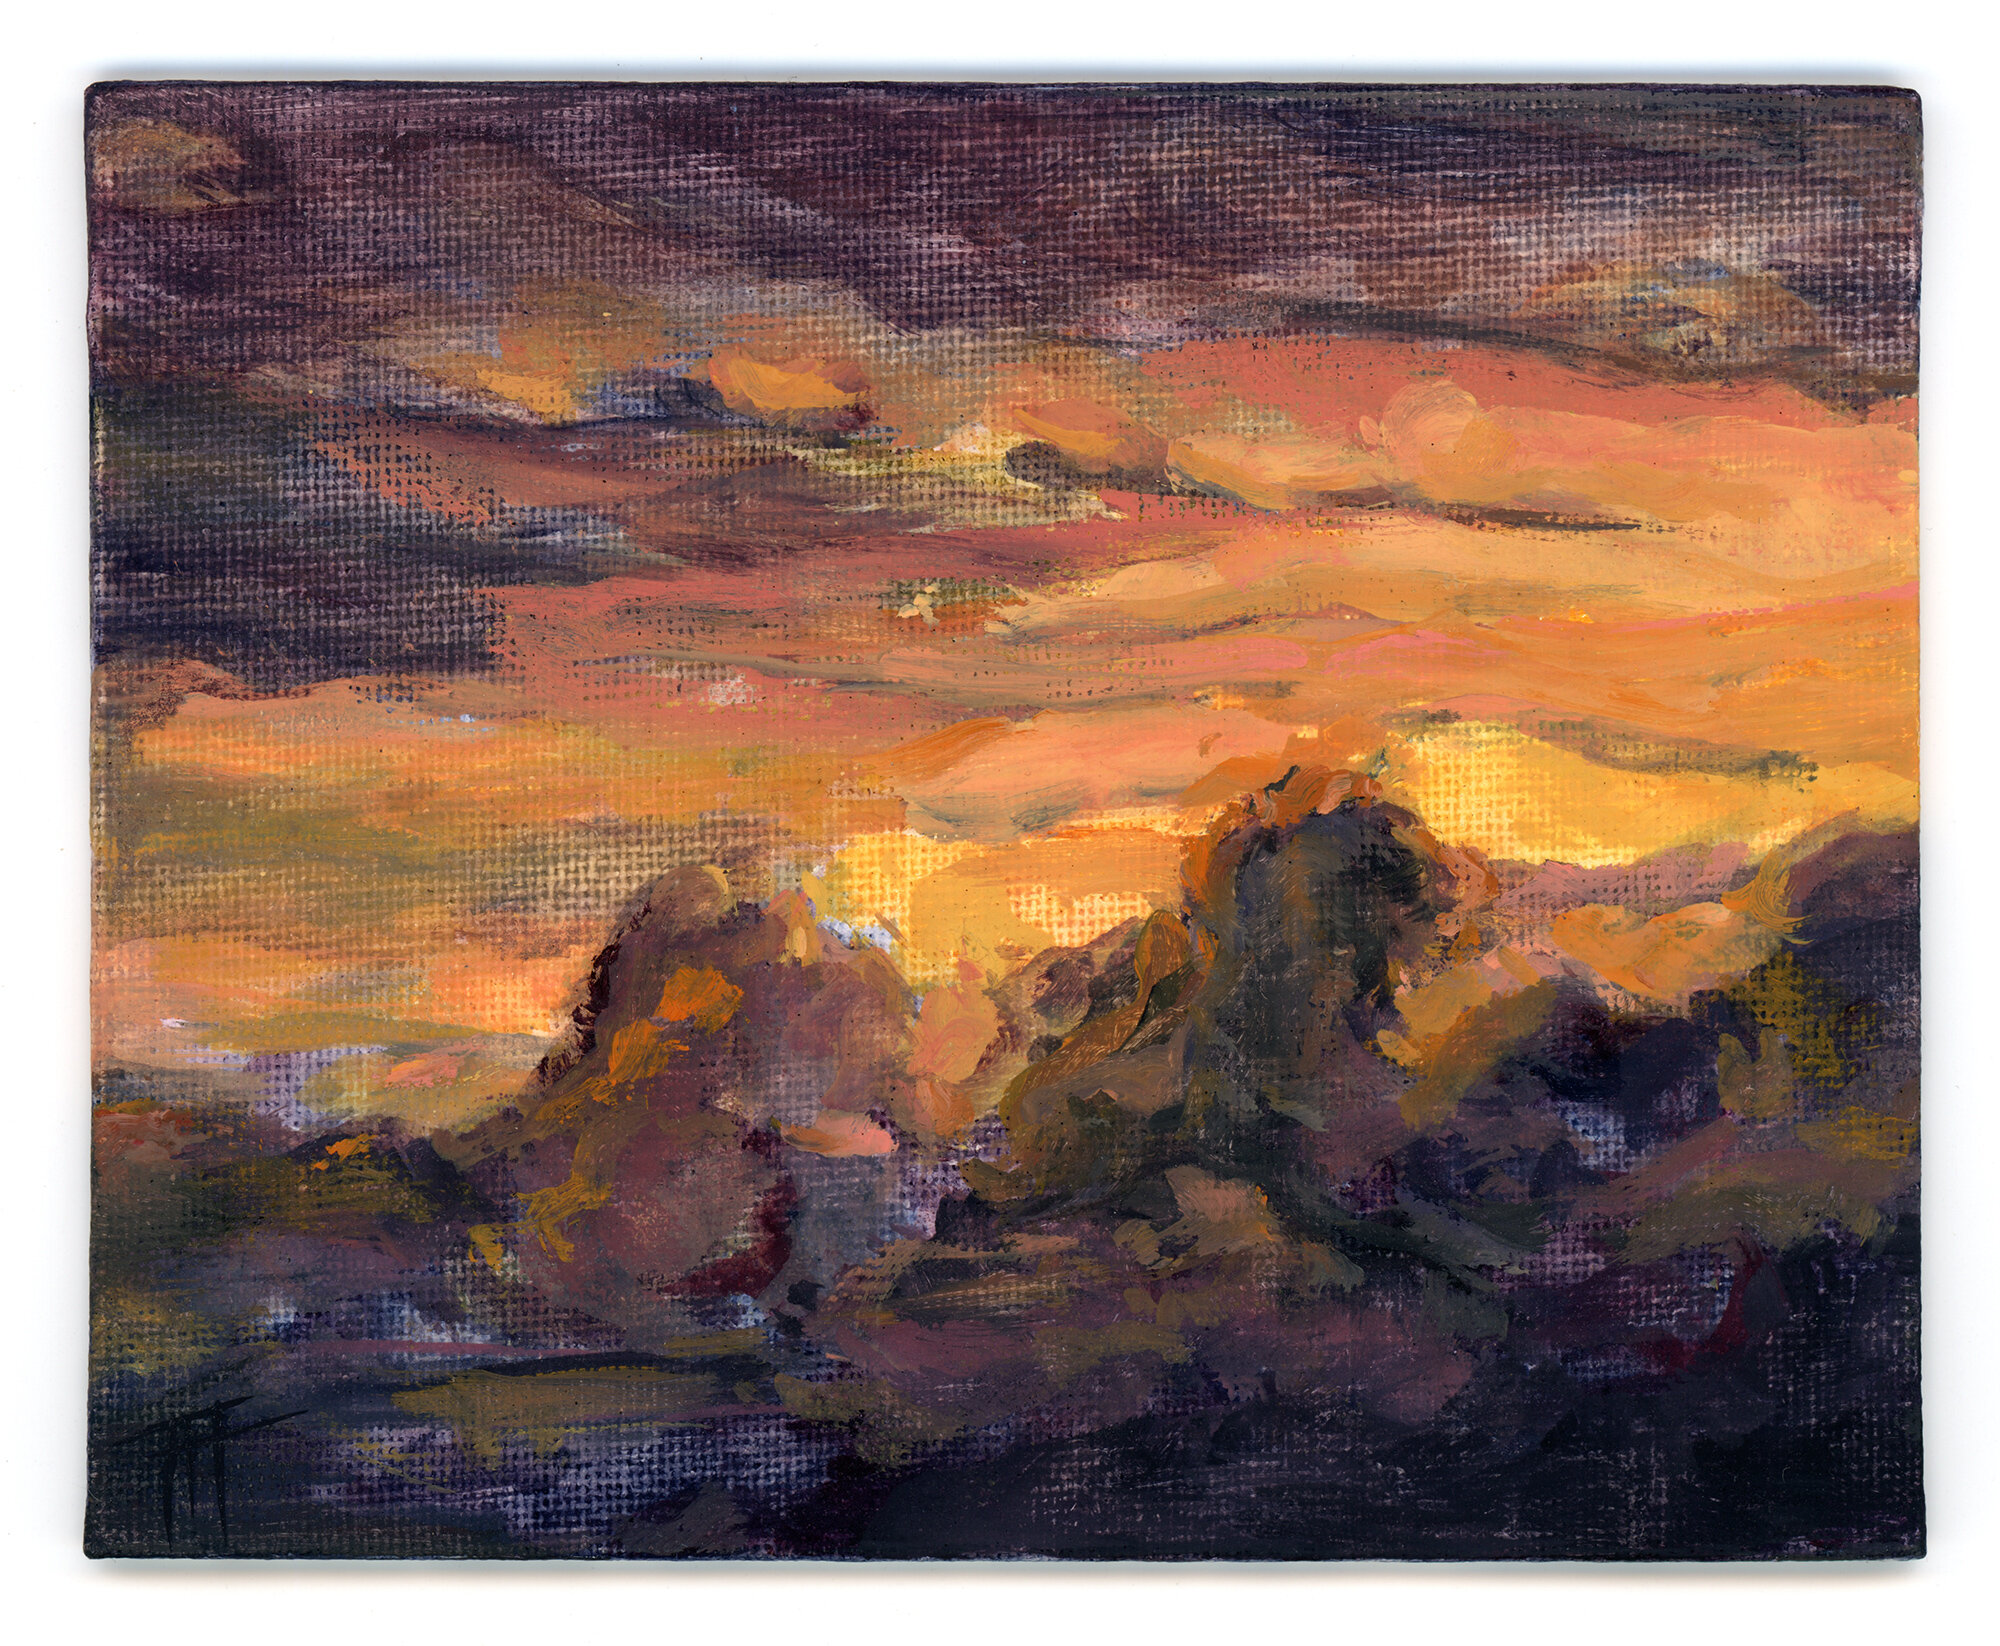  Sunset Cloud, 2020. 4.75 x 5.9 in. Oil on canvas board. 